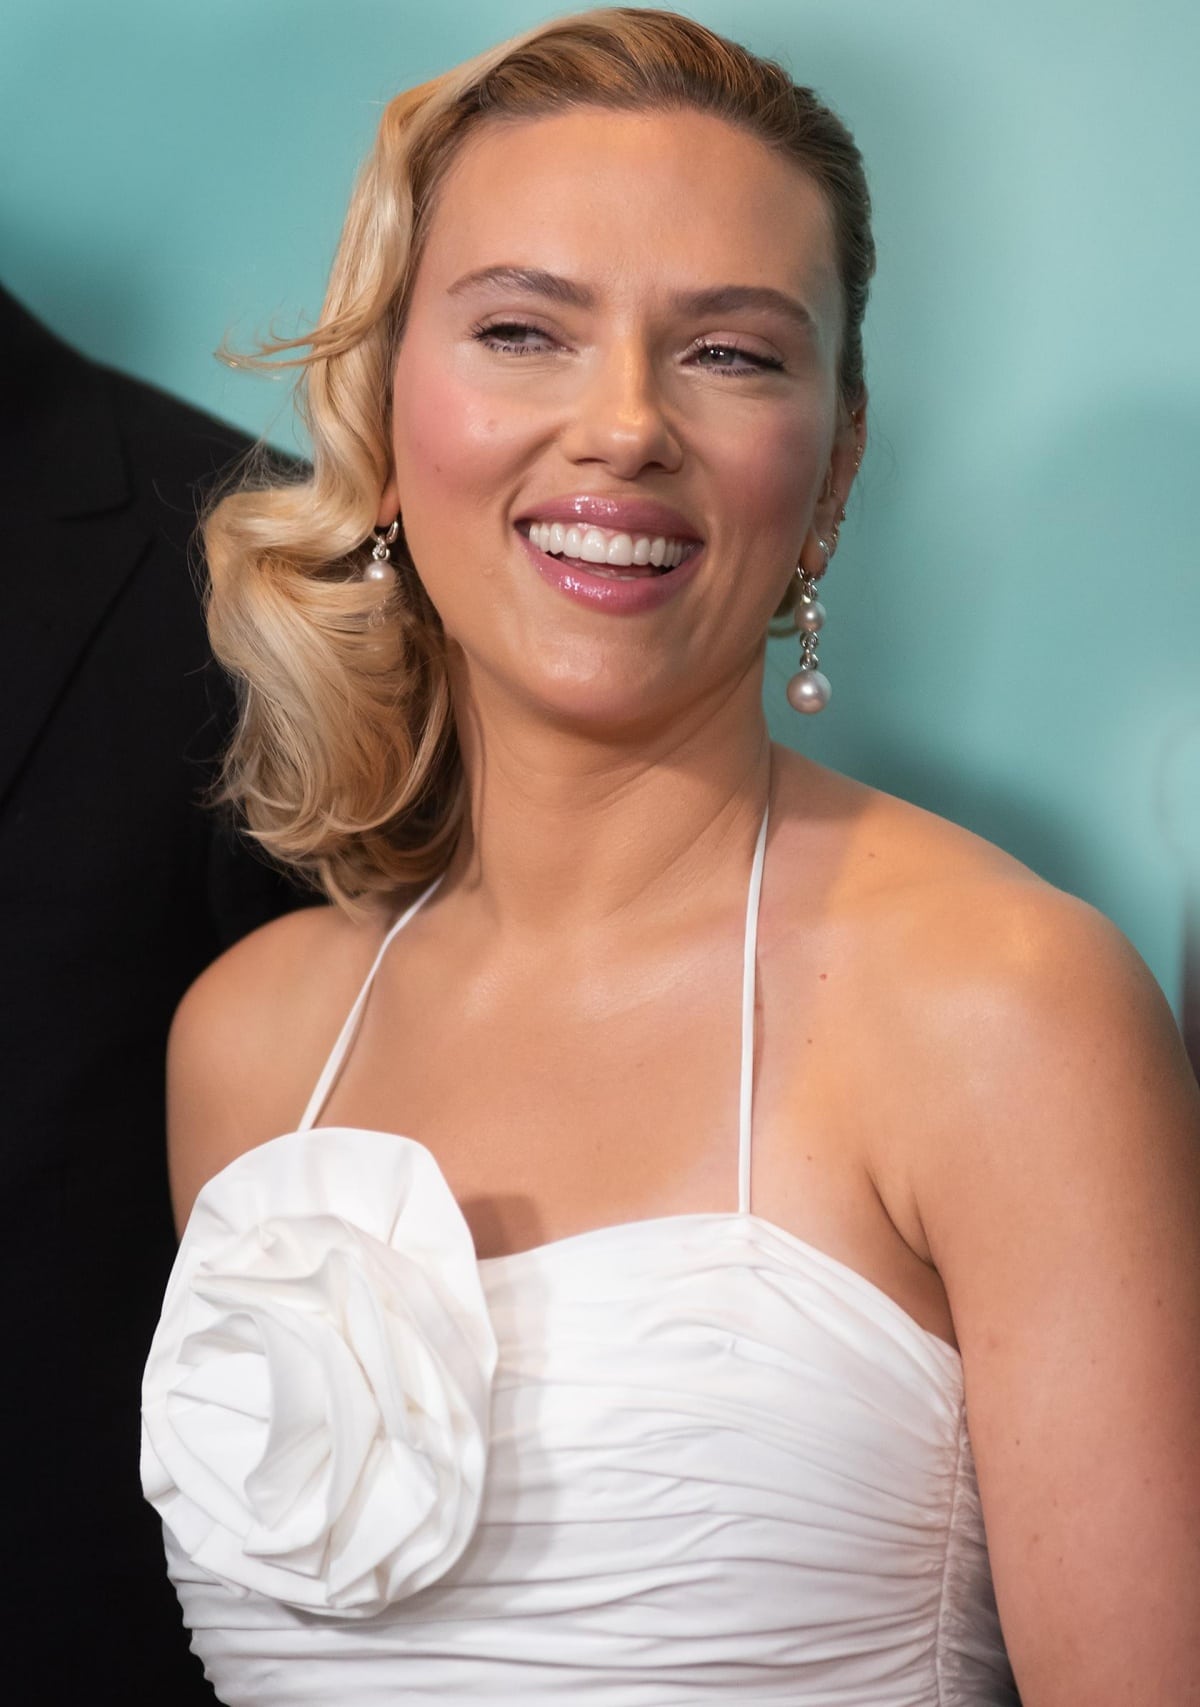 Scarlett Johansson’s beauty look includes flawless makeup, a retro-inspired hairstyle, and David Yurman diamond and pearl earrings for more touches of glamour